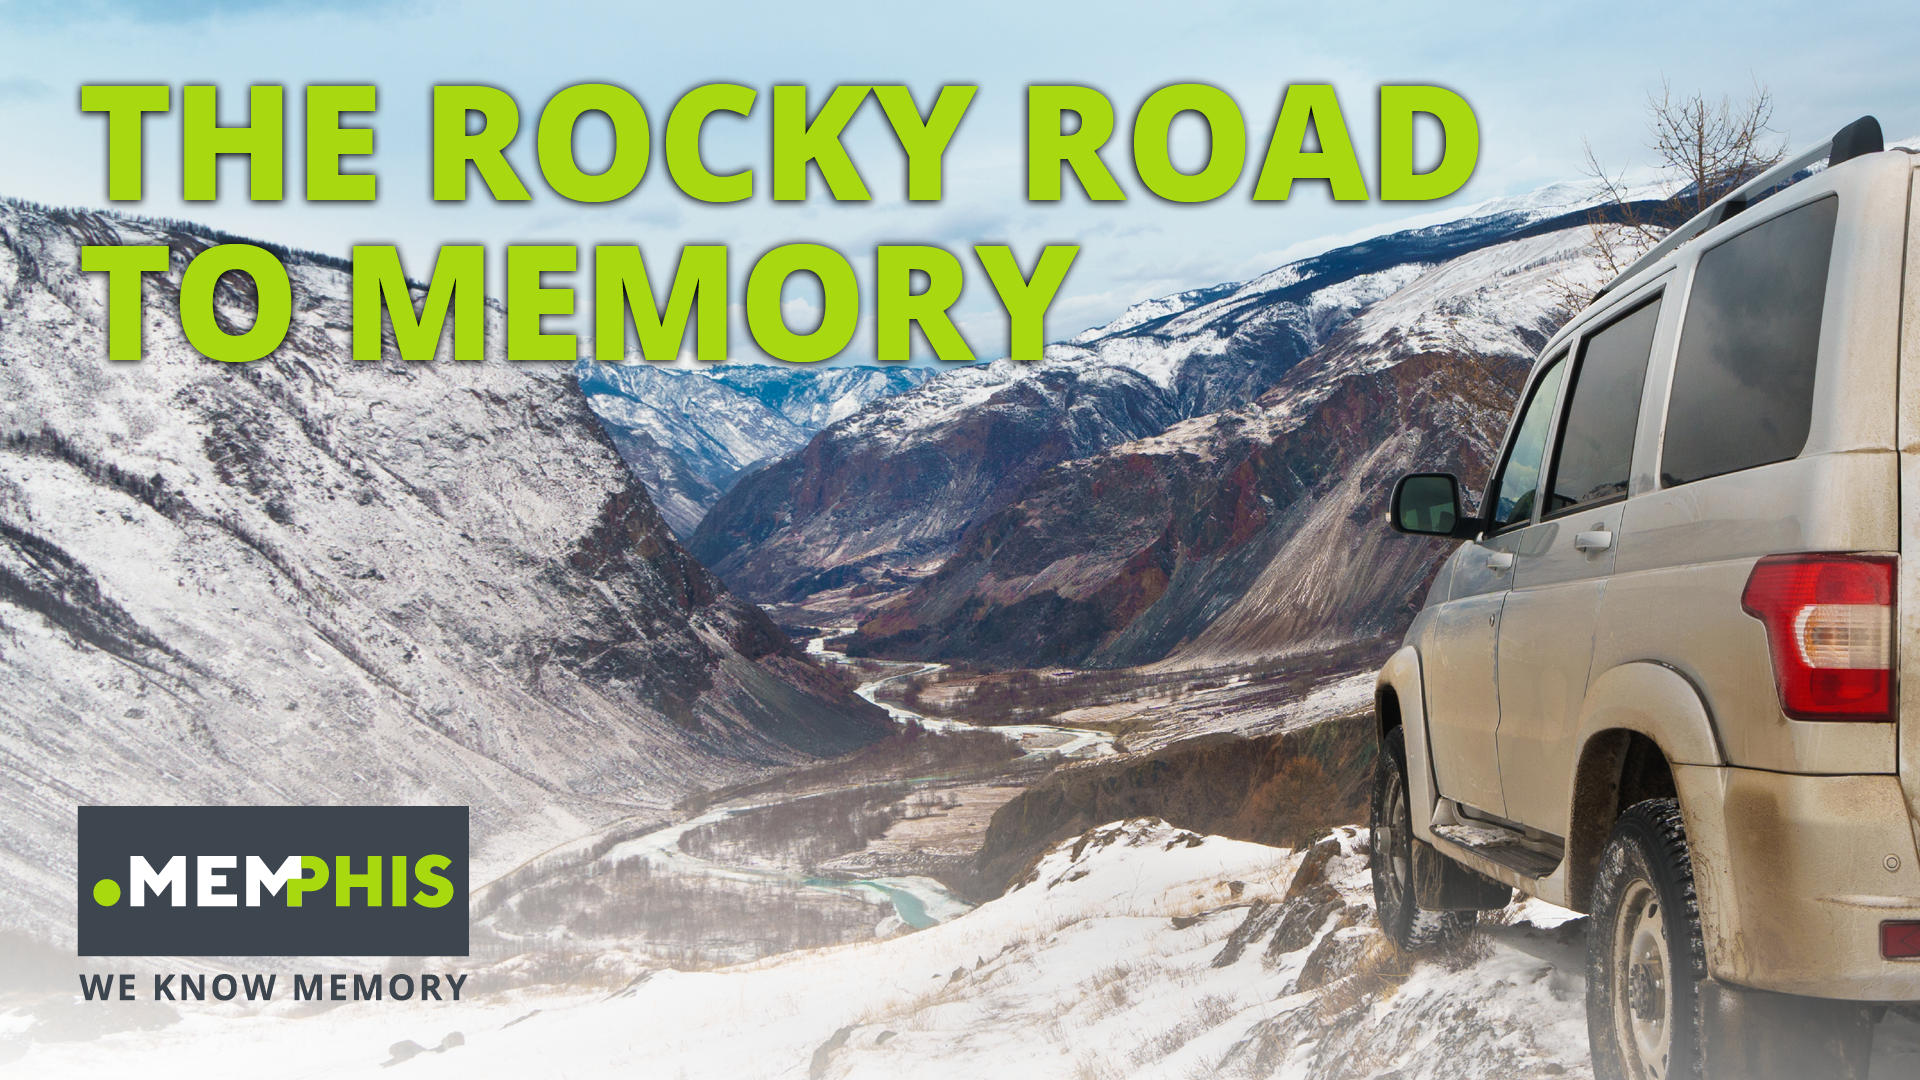 The roads in semiconductor memory are rocky